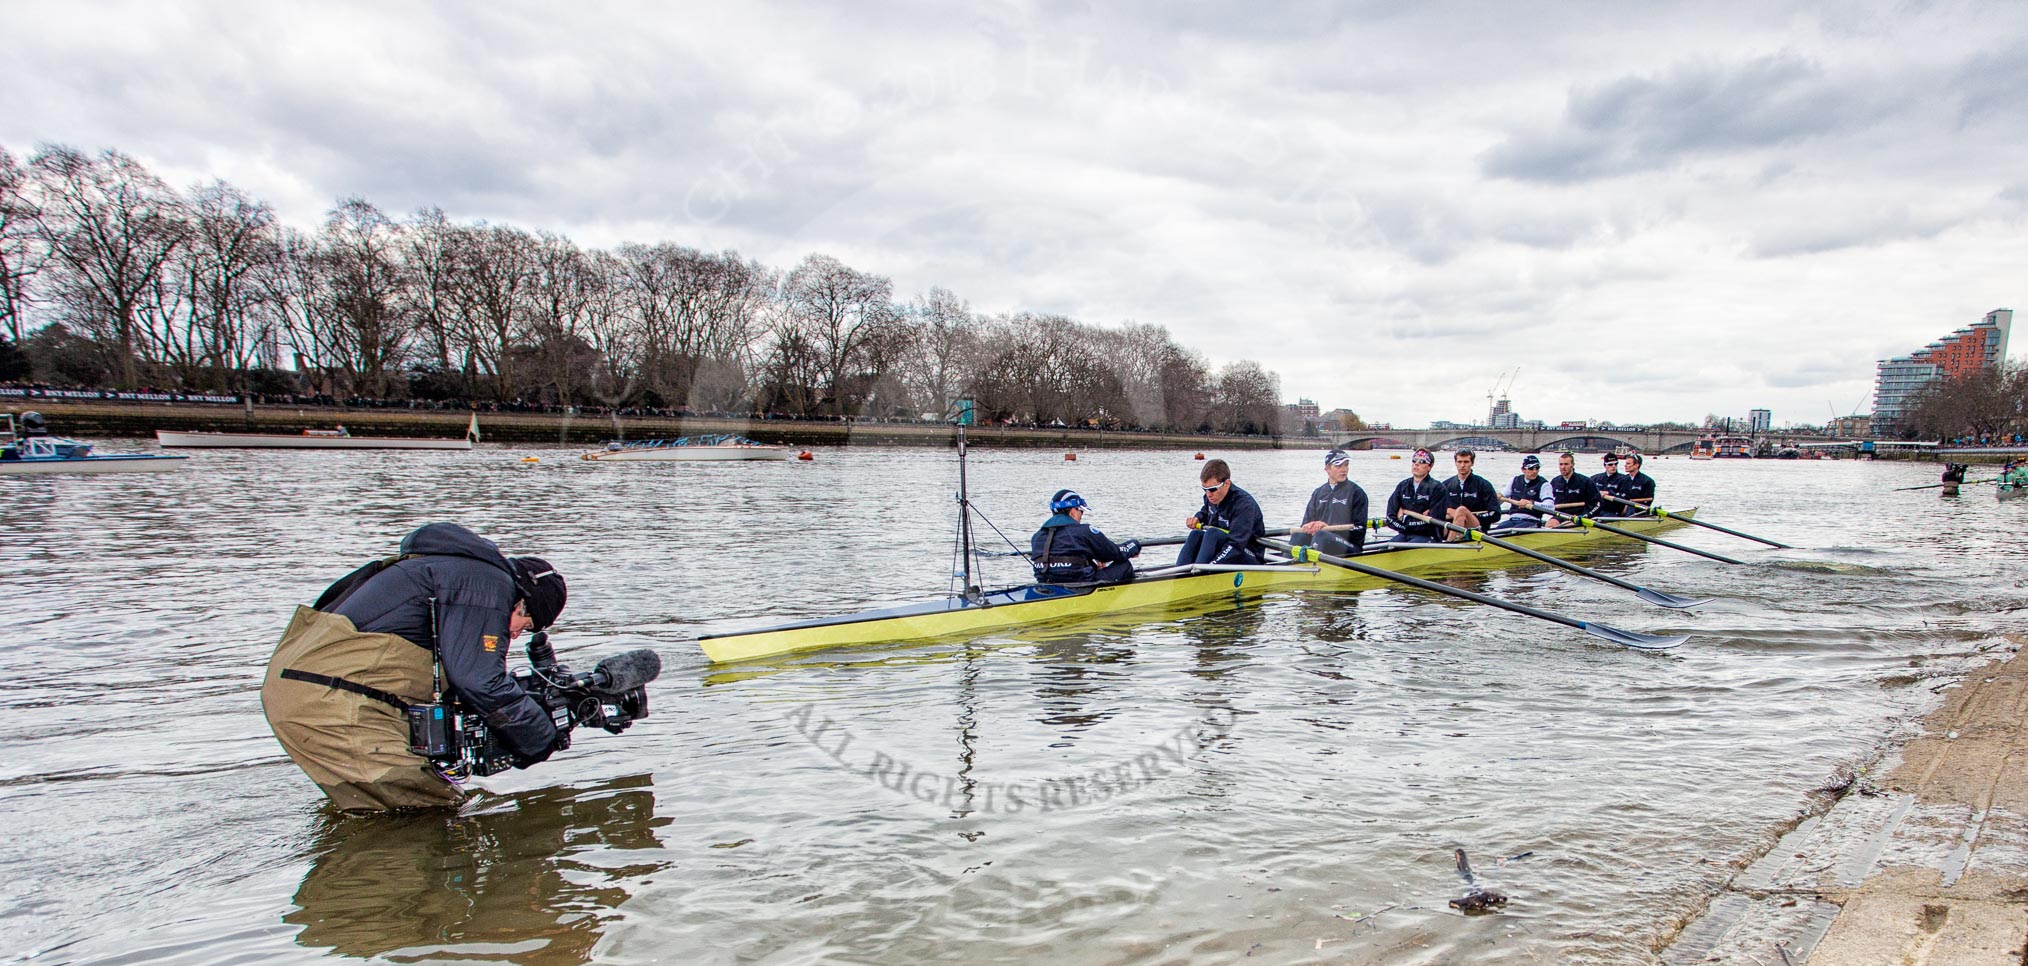 The Boat Race 2013.
Putney,
London SW15,

United Kingdom,
on 31 March 2013 at 15:48, image #166